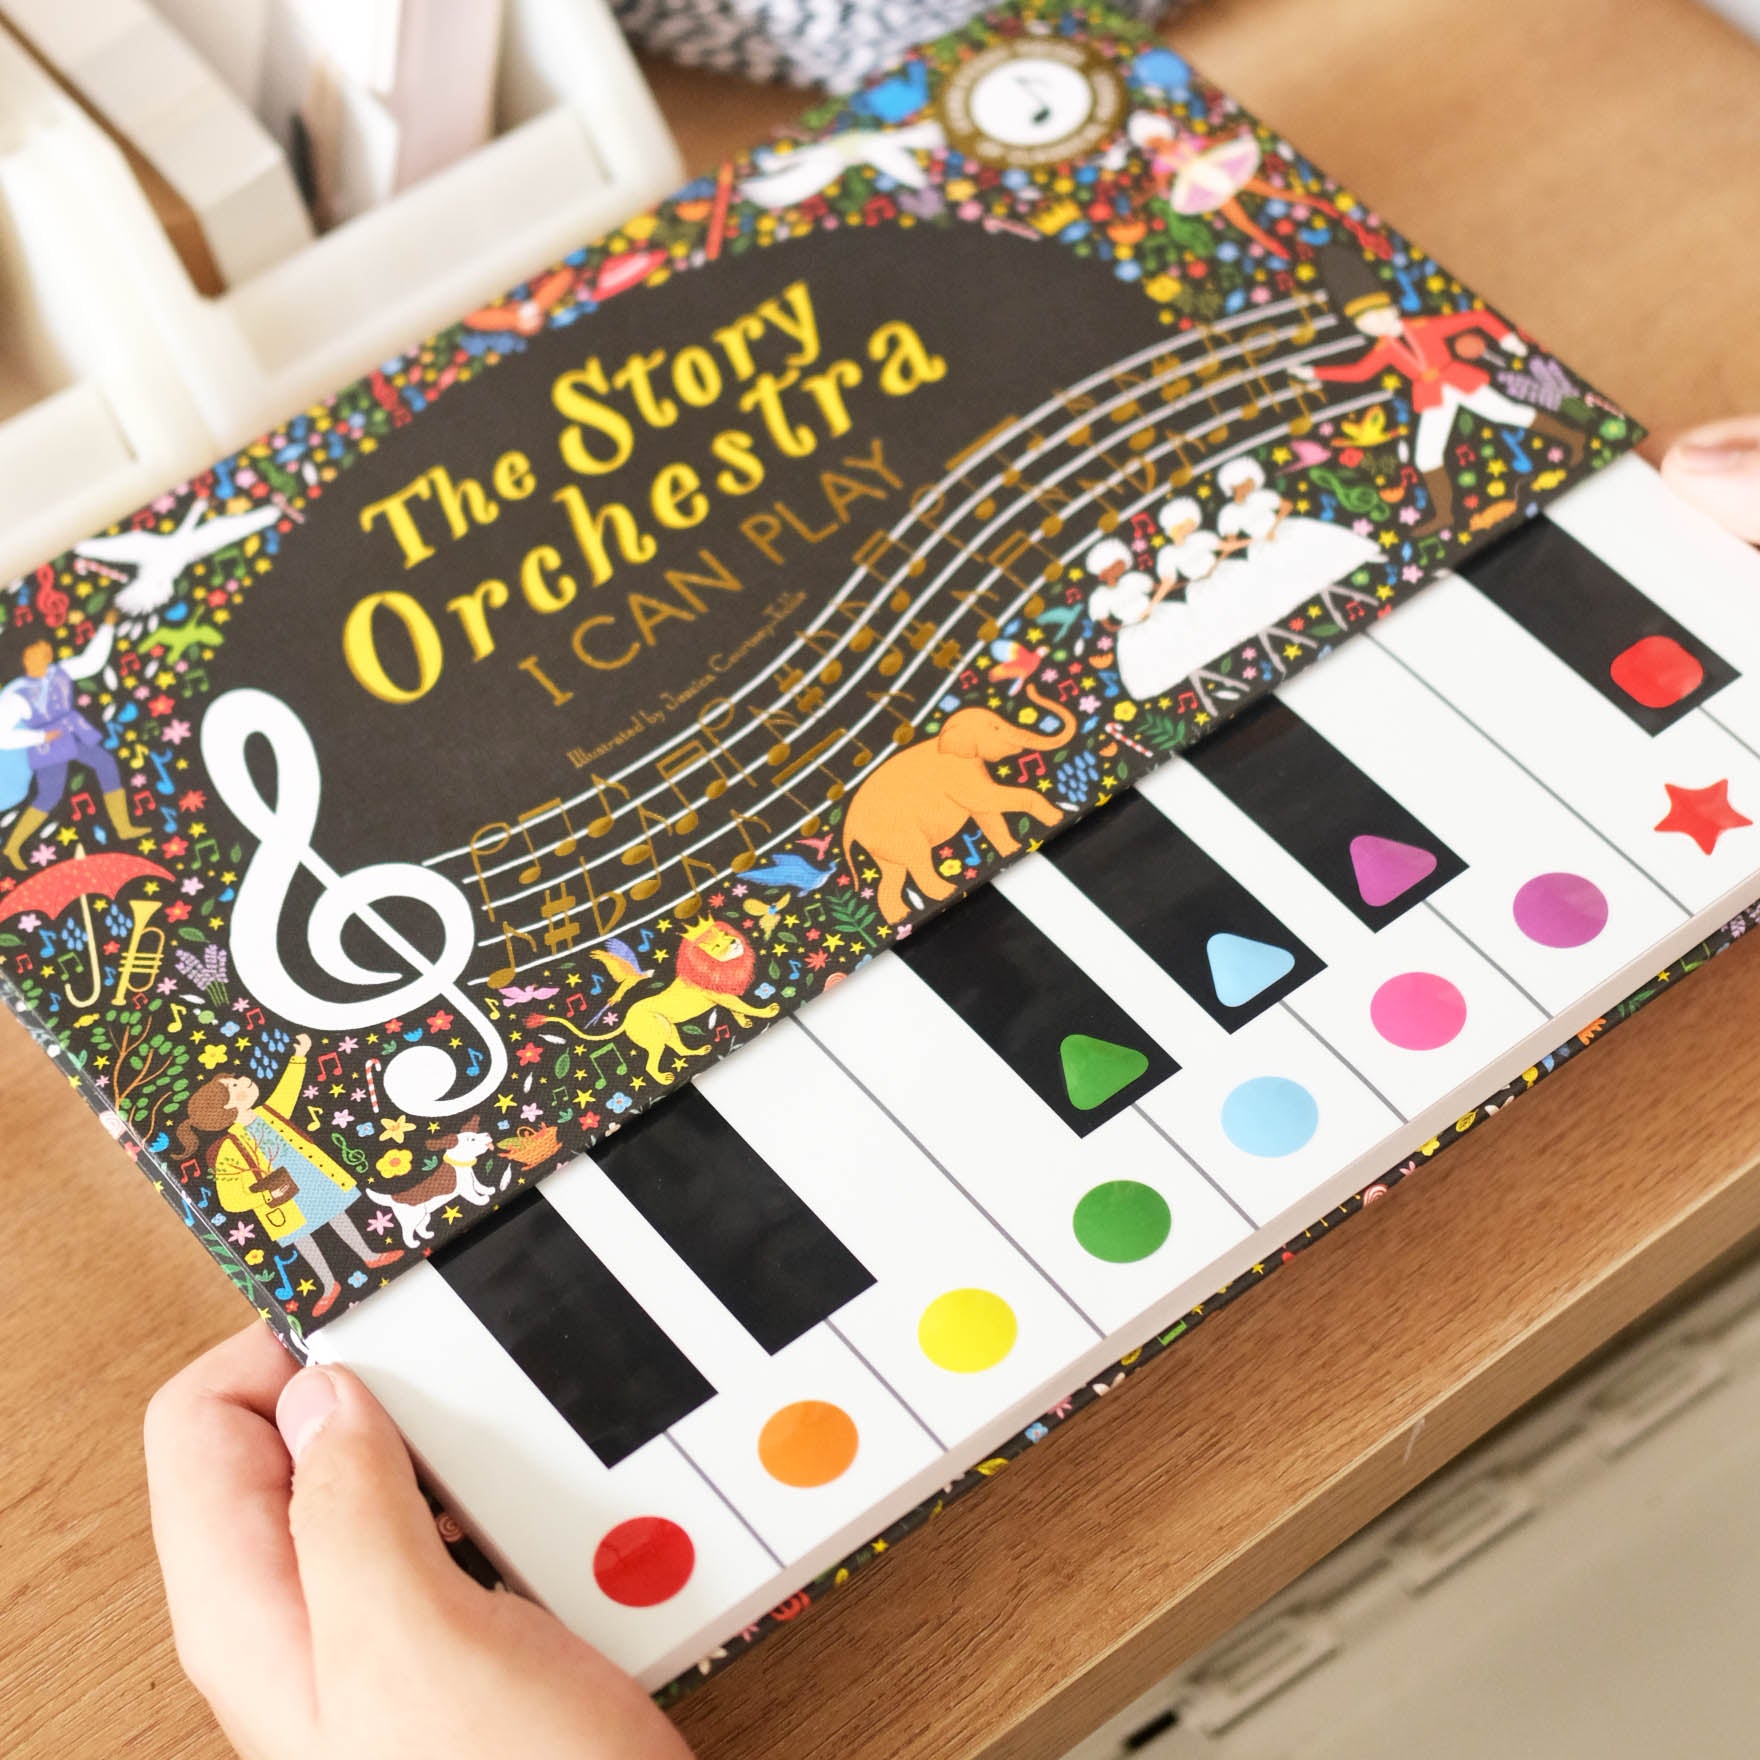 Story Orchestra: I Can Play (Novelty Book)